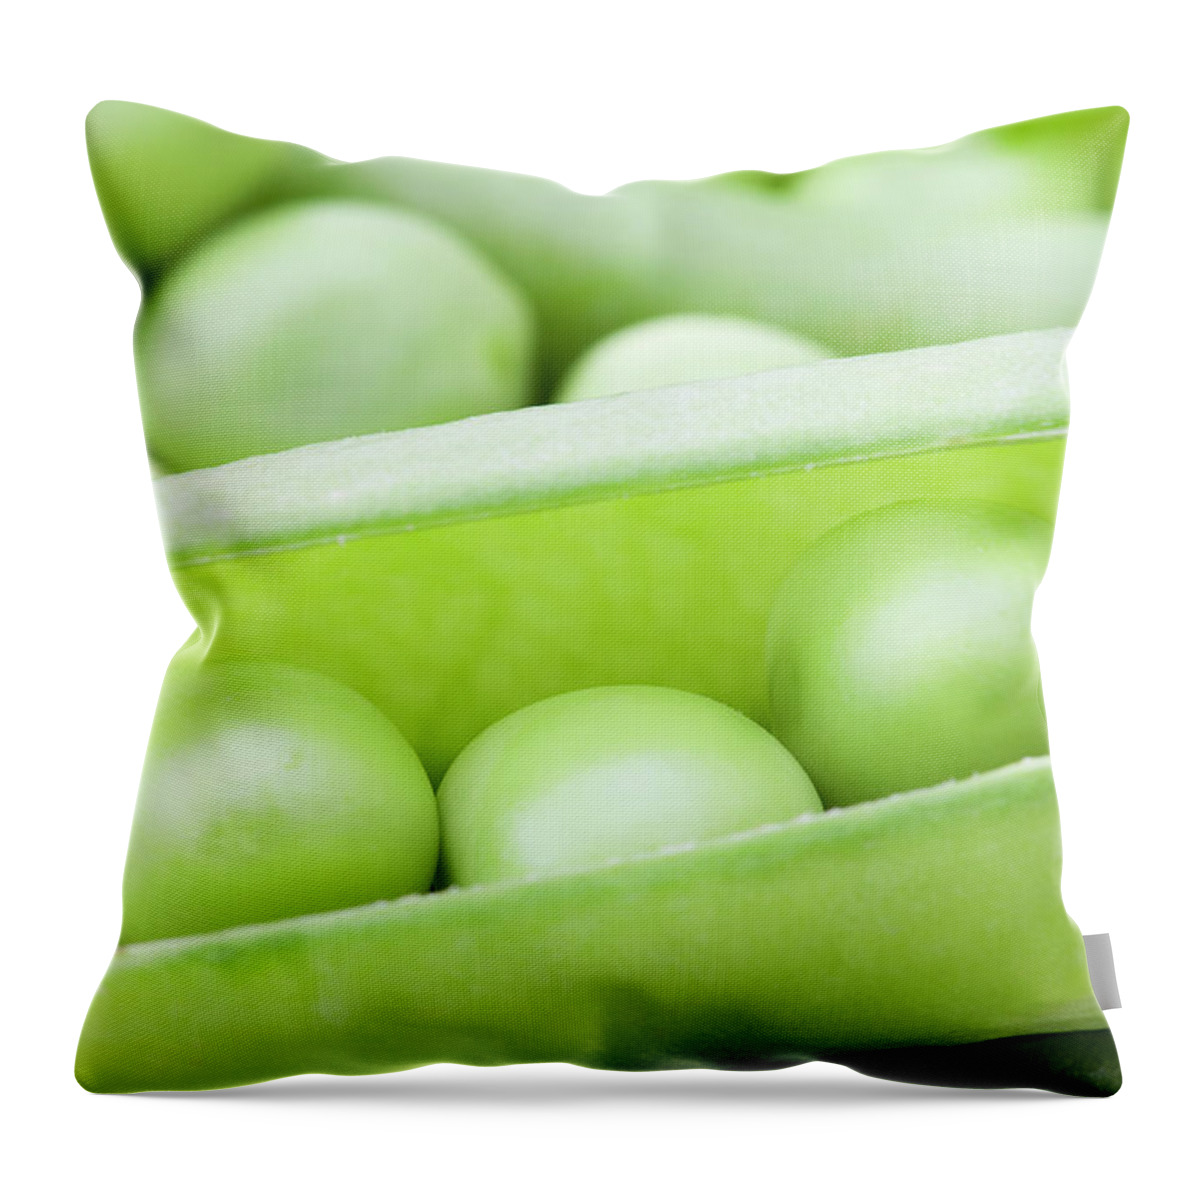 Pea Pod Throw Pillow featuring the photograph Organic Peas by Andrew Dernie